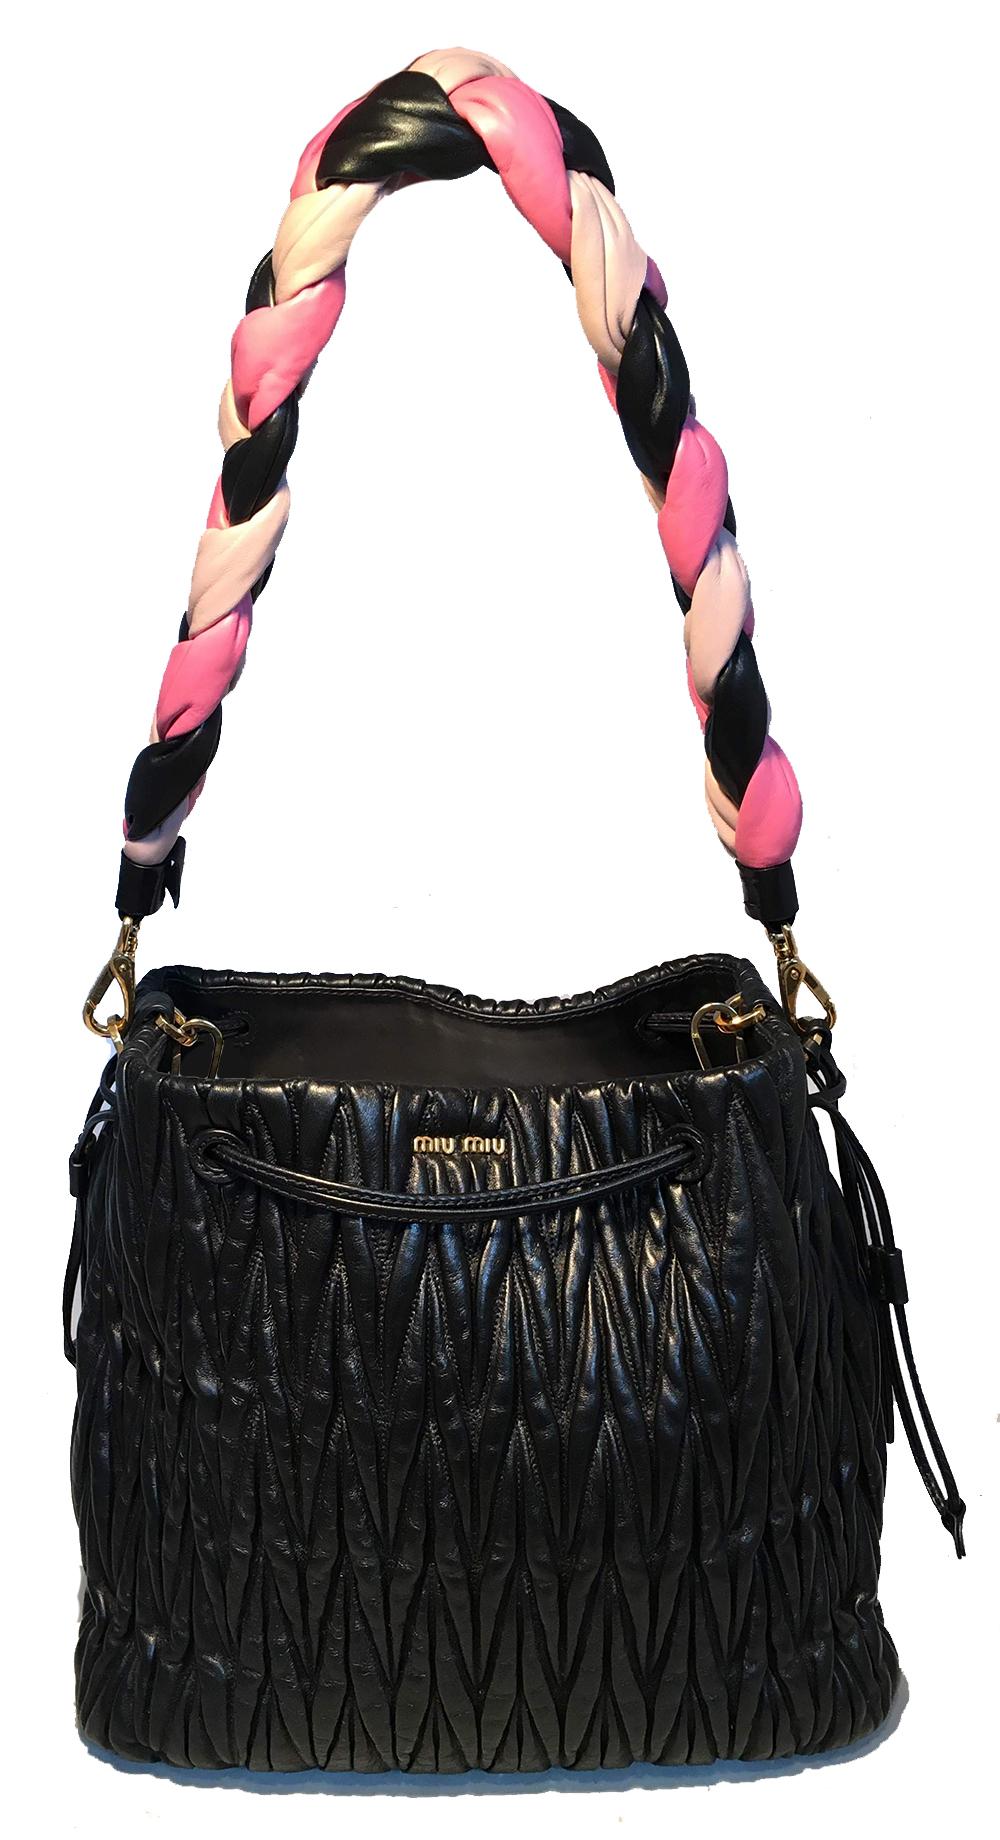 Miu Miu Matelassé Secchiello Black Leather Bucket Bag with Pink Braided Strap in excellent condition. Black nappa leather exterior in signature matelasse quilting. Gold hardware trim. Unique top soft drawstring style closure. Can be left open as see